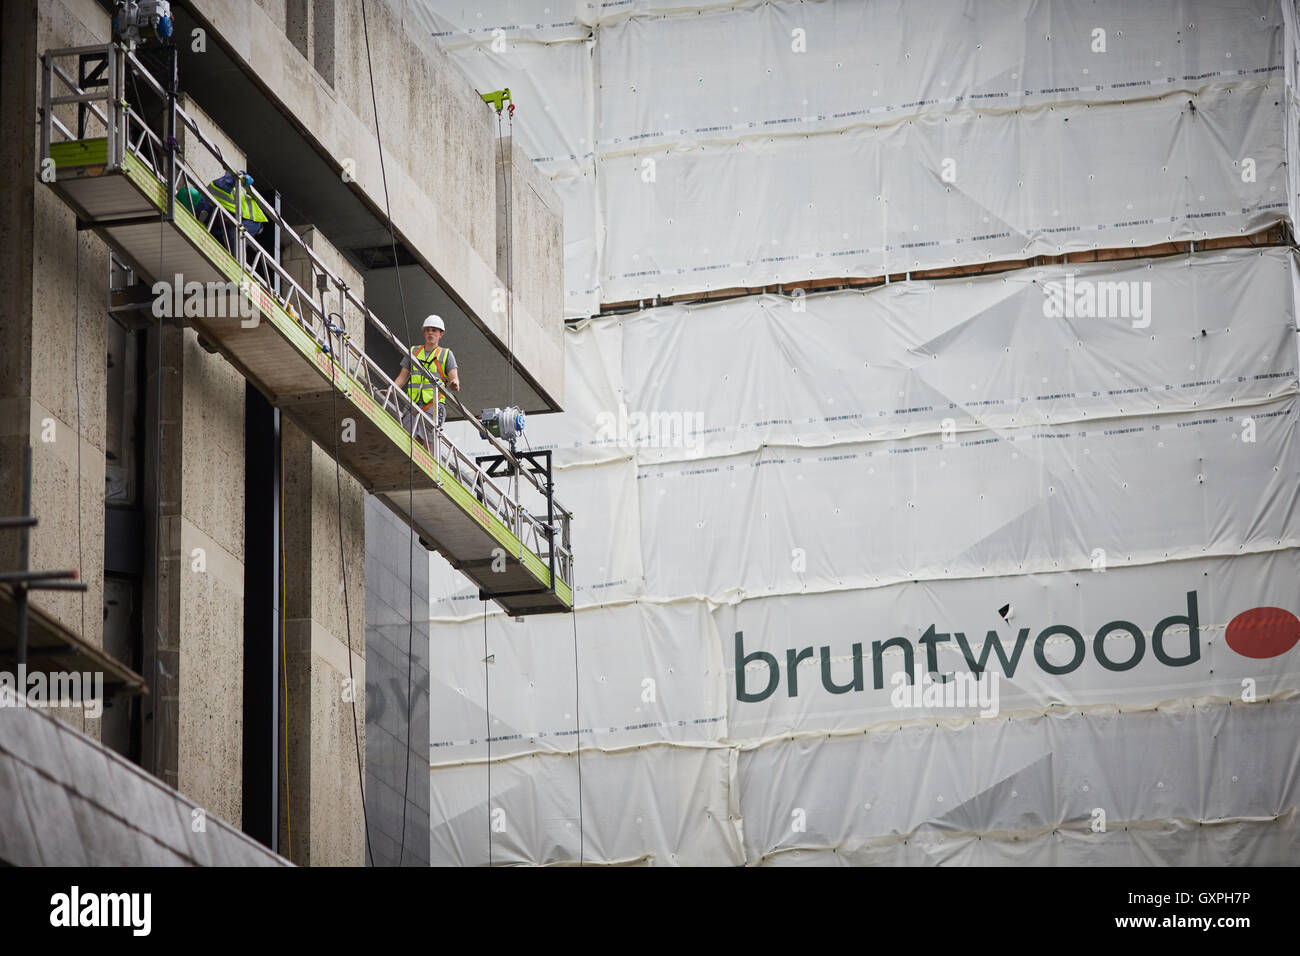 Brentwood Manchester building restoration   workers workmen work building site construction making work started excavation groun Stock Photo